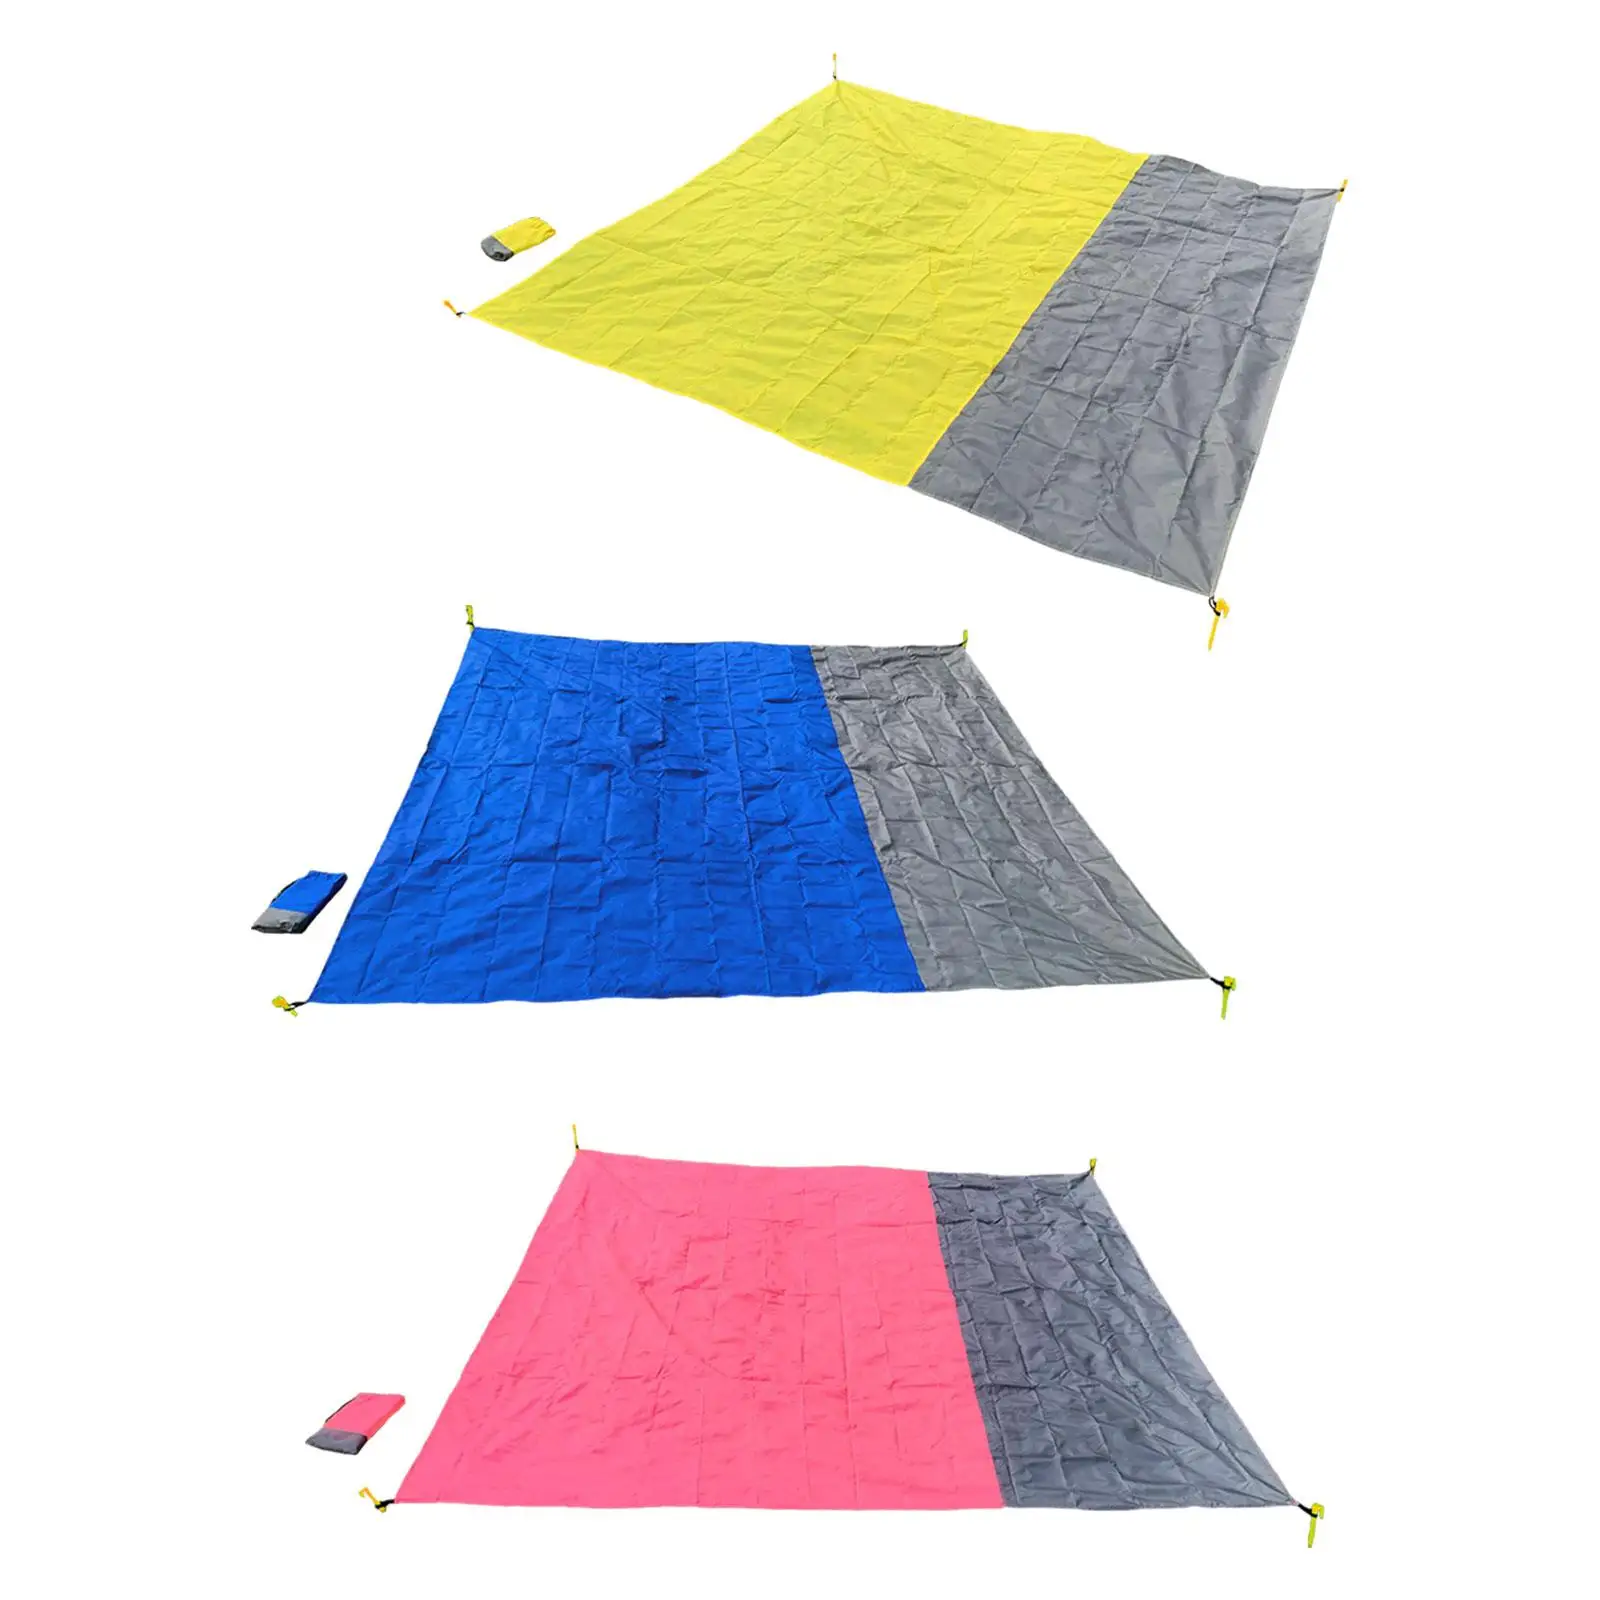 Picnic Blanket Lightweight Compact Beach Blanket for Park Backpacking Hiking